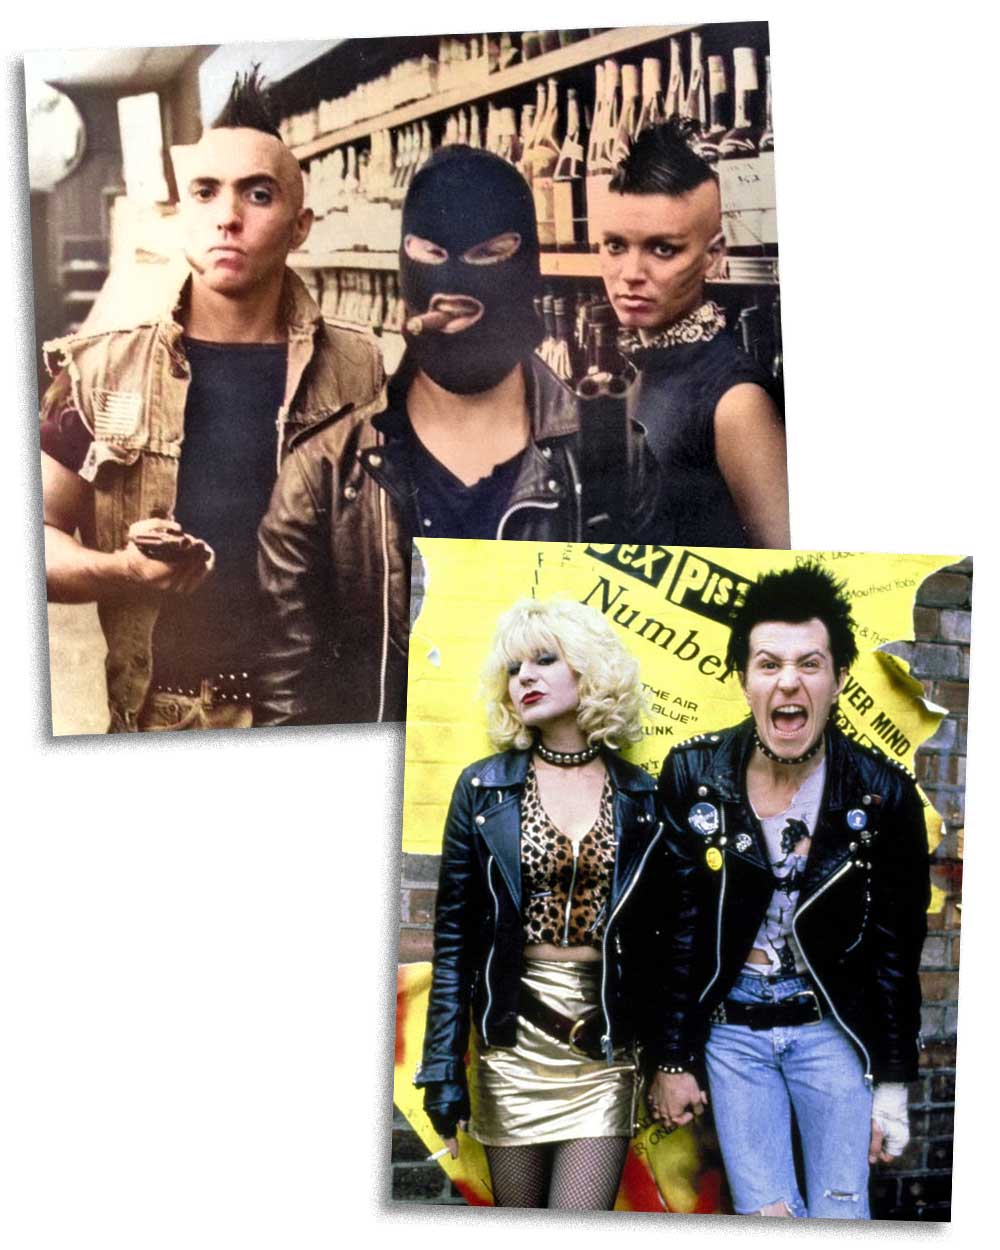 The Punk Look of the 80s fashion for boys